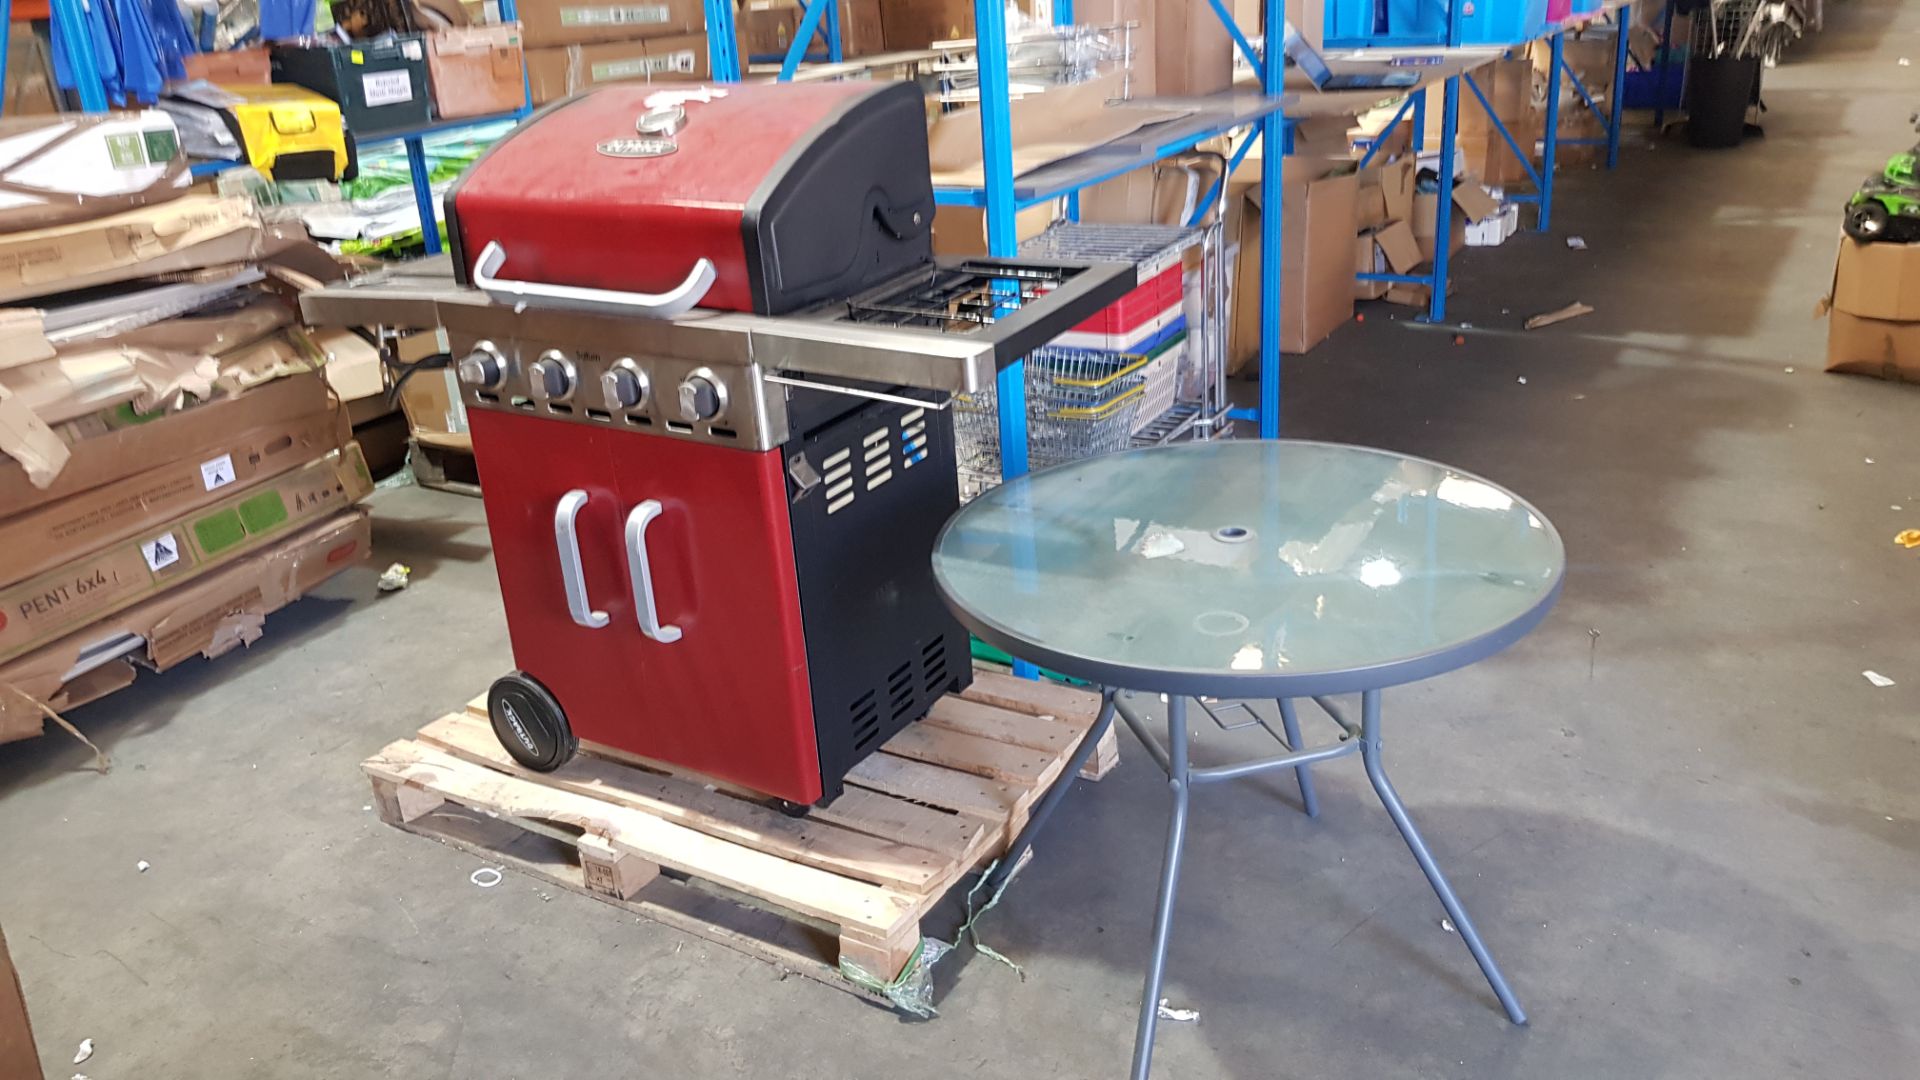 (R9F) 2 Items. 1 X Outback Saturn BBQ (Missing Grill Ð Used) & 1 X 86cm Dia Round Outdoor Table